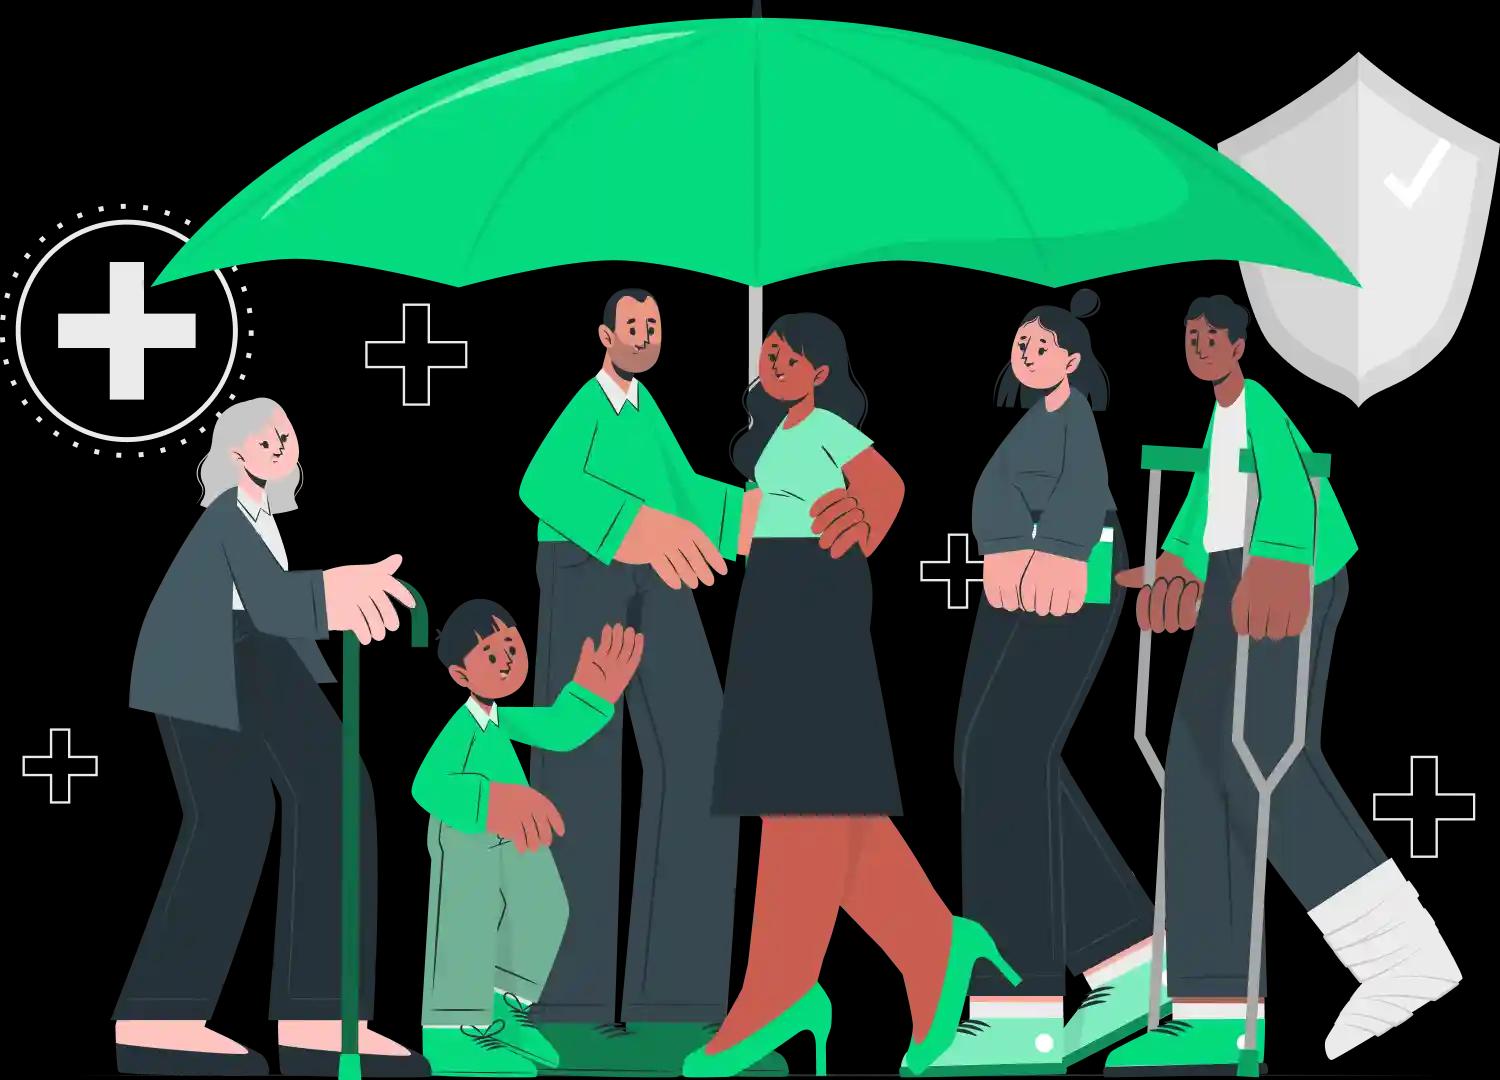 A diverse group of individuals under a large green umbrella with a medical plus sign, indicating coverage or protection, depicting a group health insurance concept for various demographics.